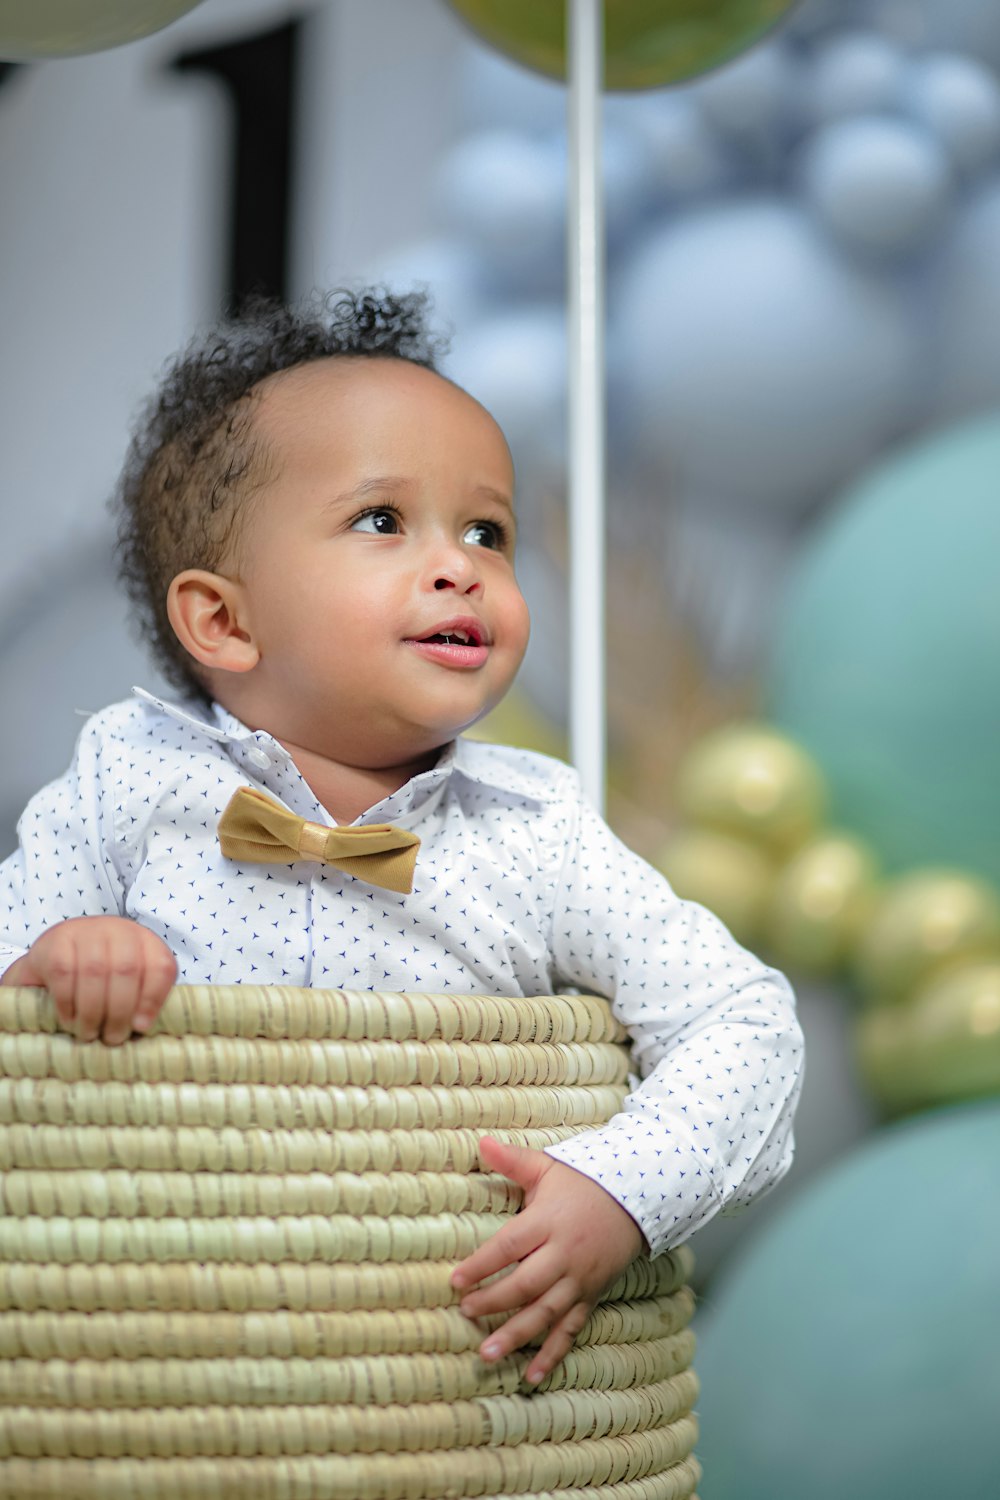 baby in white and yellow polka dot long sleeve shirt sitting on brown woven  chair photo – Free Addis abeba Image on Unsplash